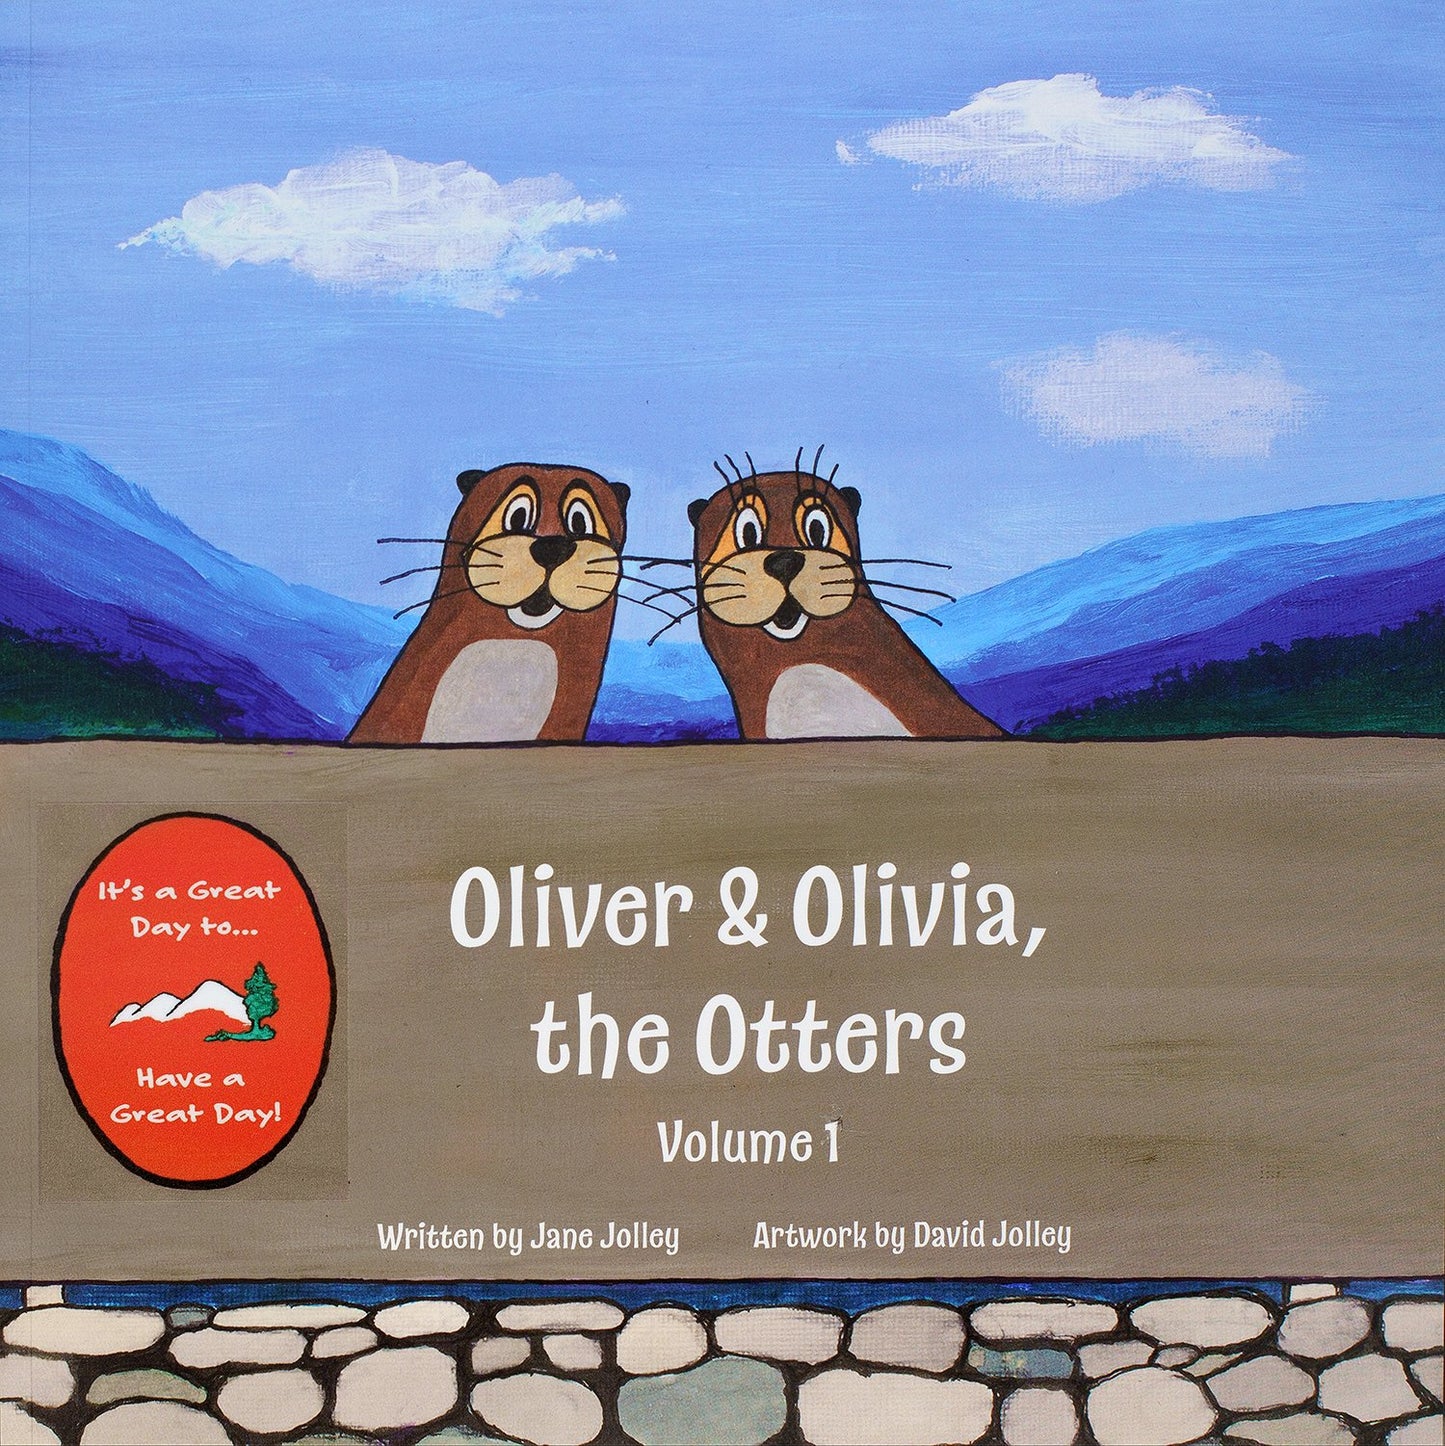 Oliver & Olivia, the Otters Volume I - It's a Great Day to Have a Great Day!